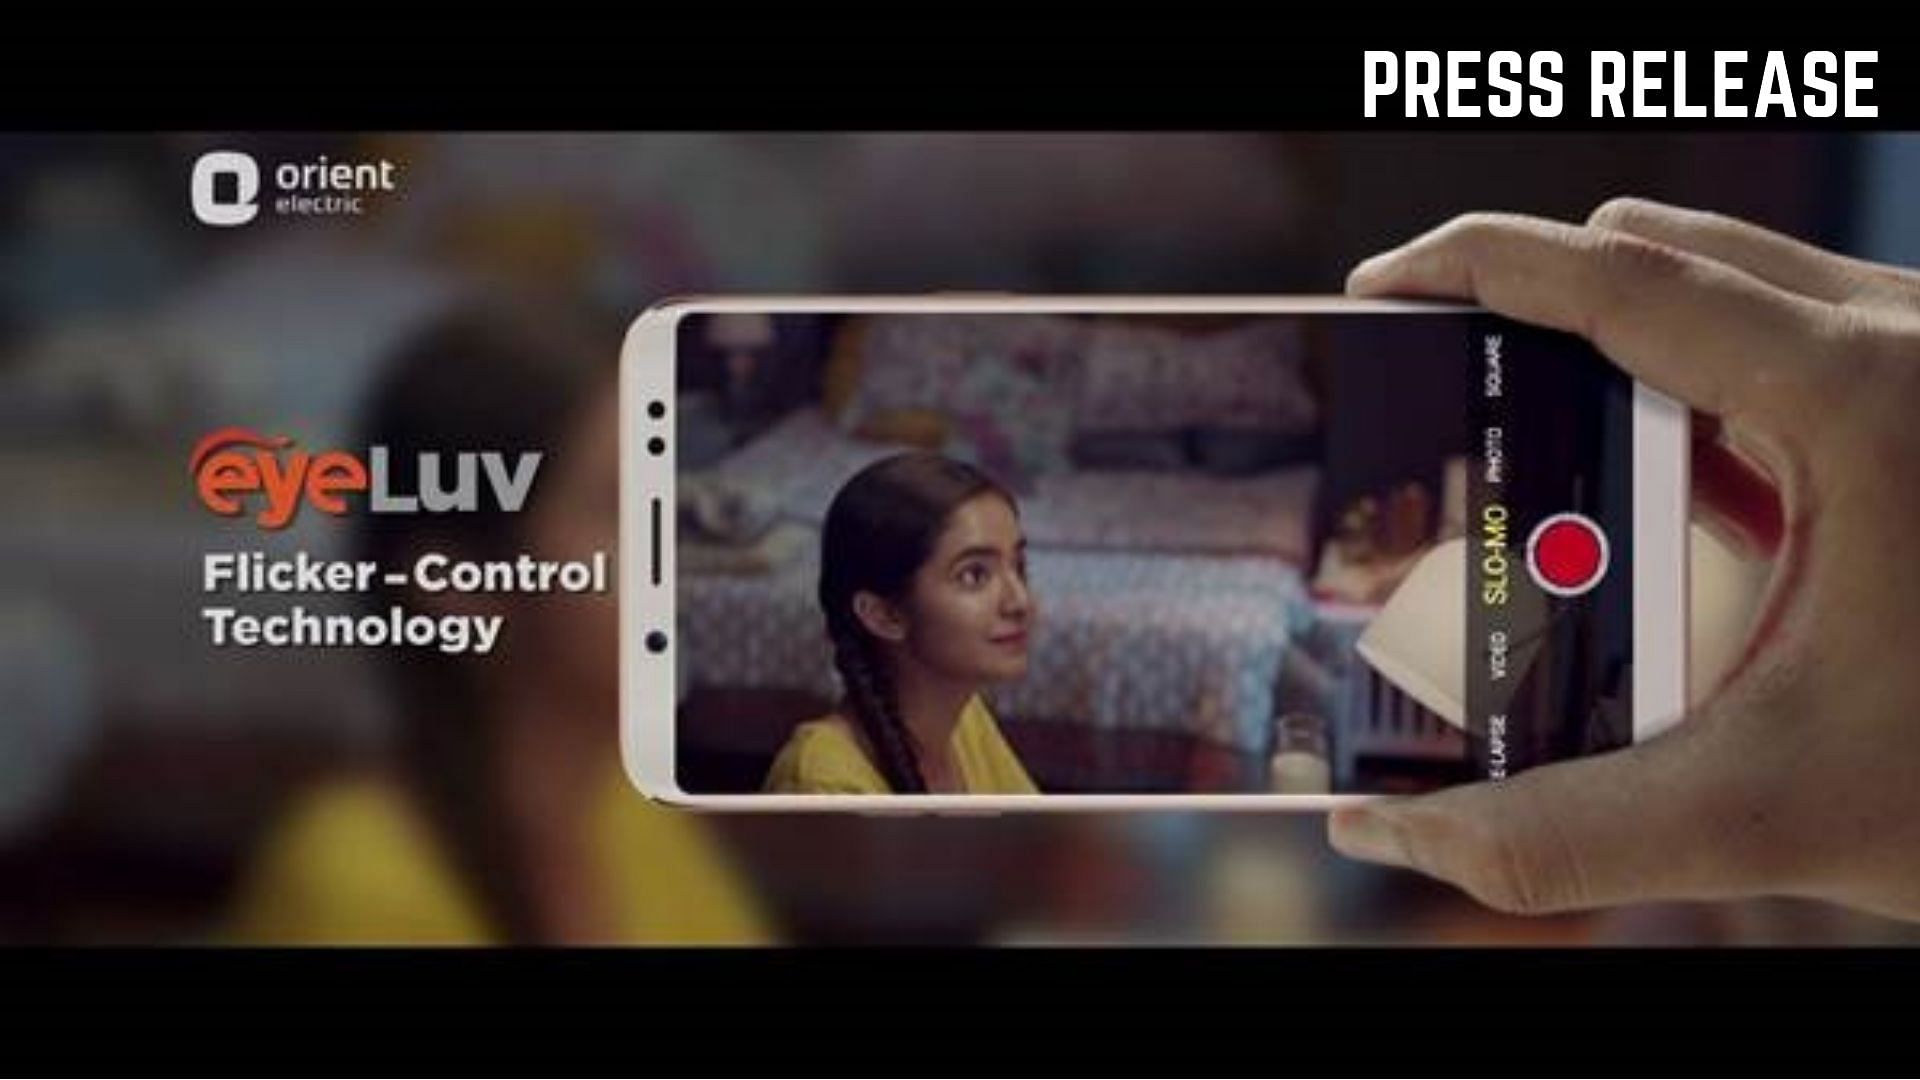 The     TVC features MS Dhoni urging people to detect the invisible flicker of LED     lights through the help of a smartphone camera